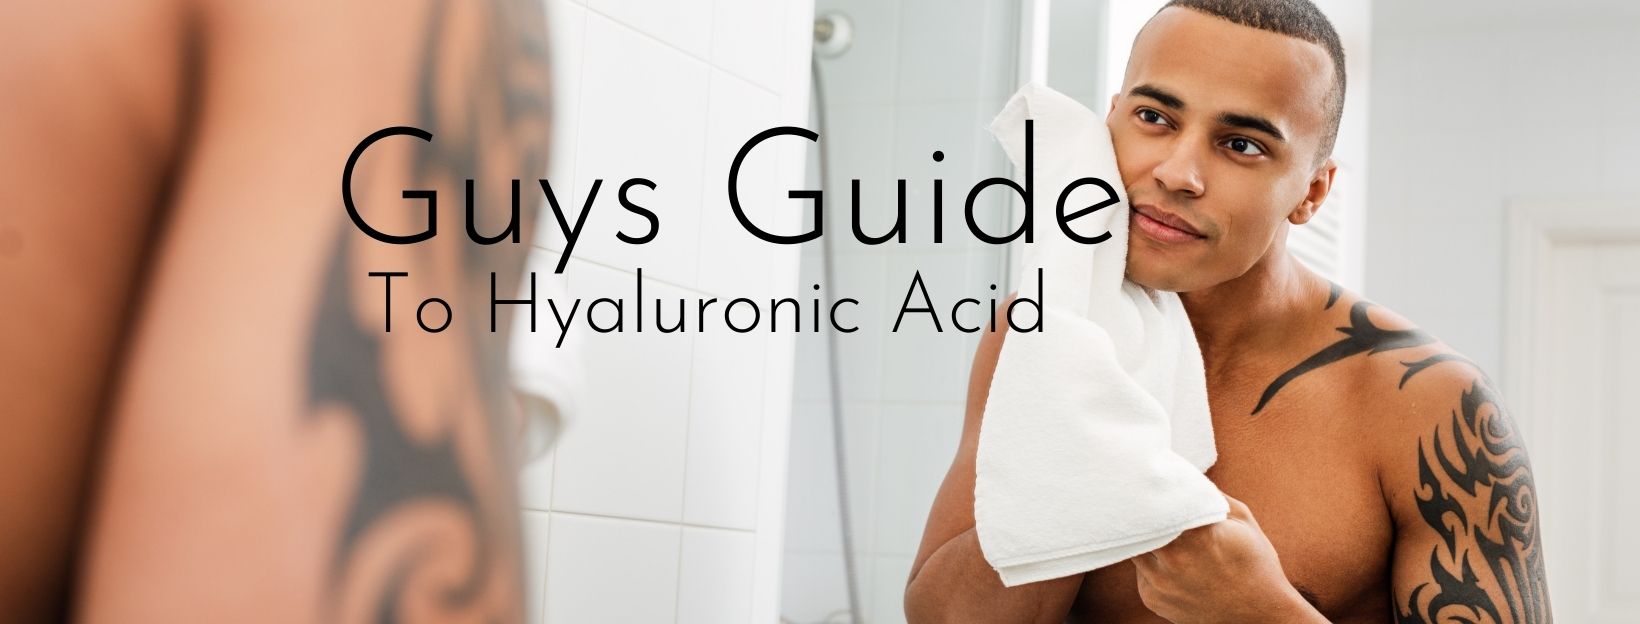 Guys Guide To Hyaluronic Acid